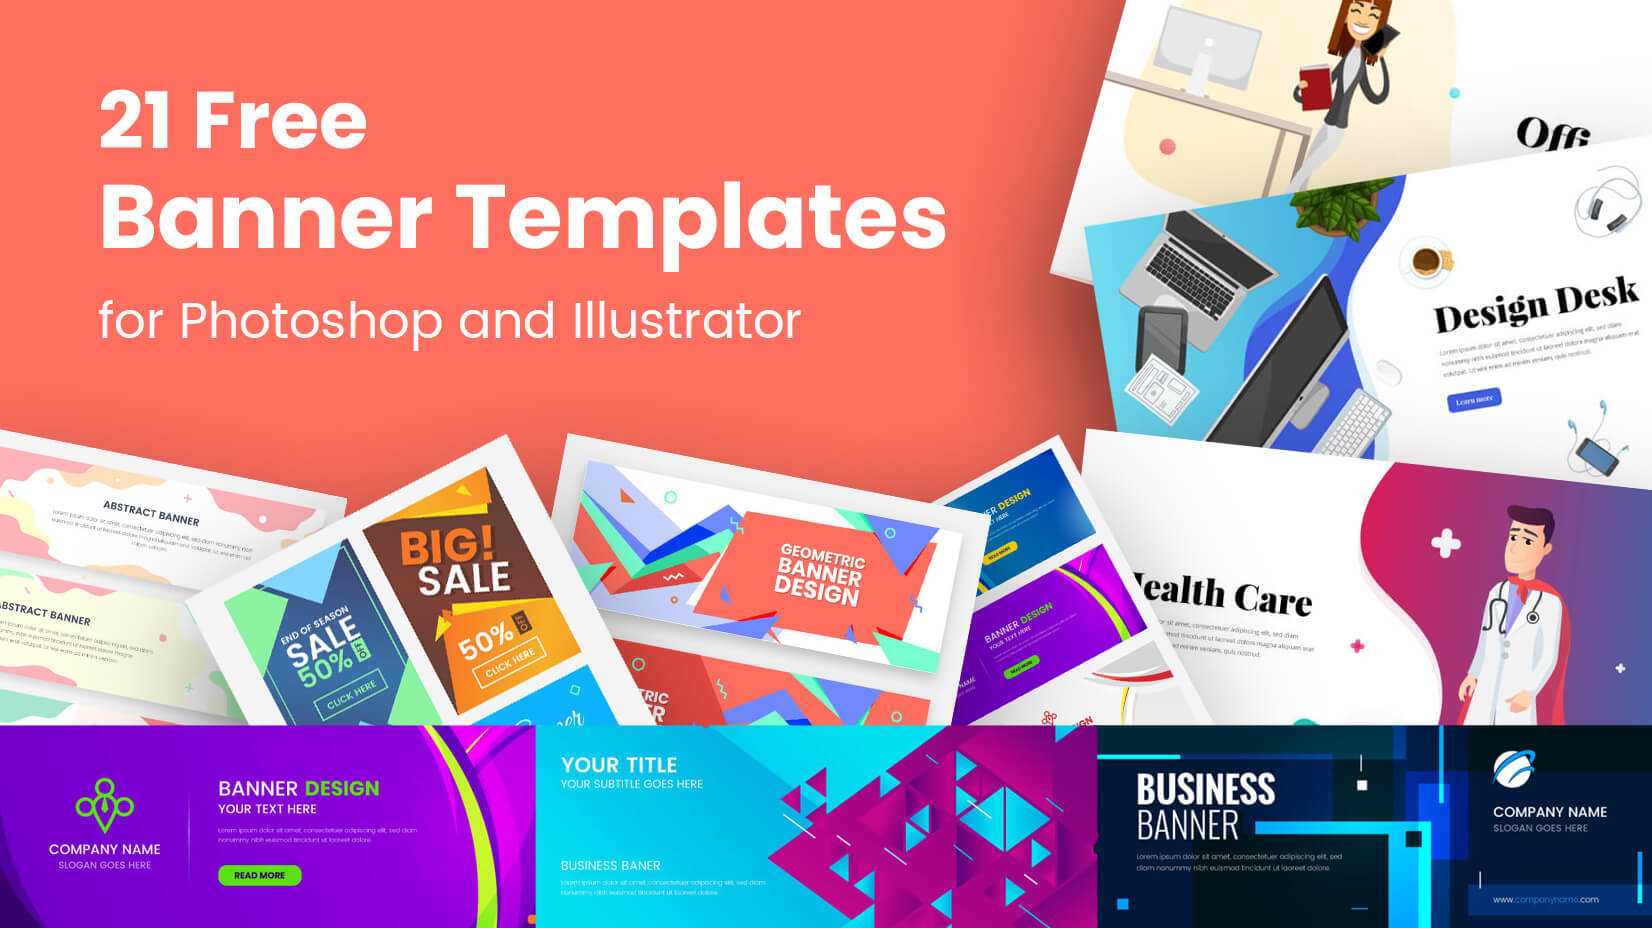 21 Free Banner Templates For Photoshop And Illustrator Pertaining To Adobe Photoshop Banner Templates